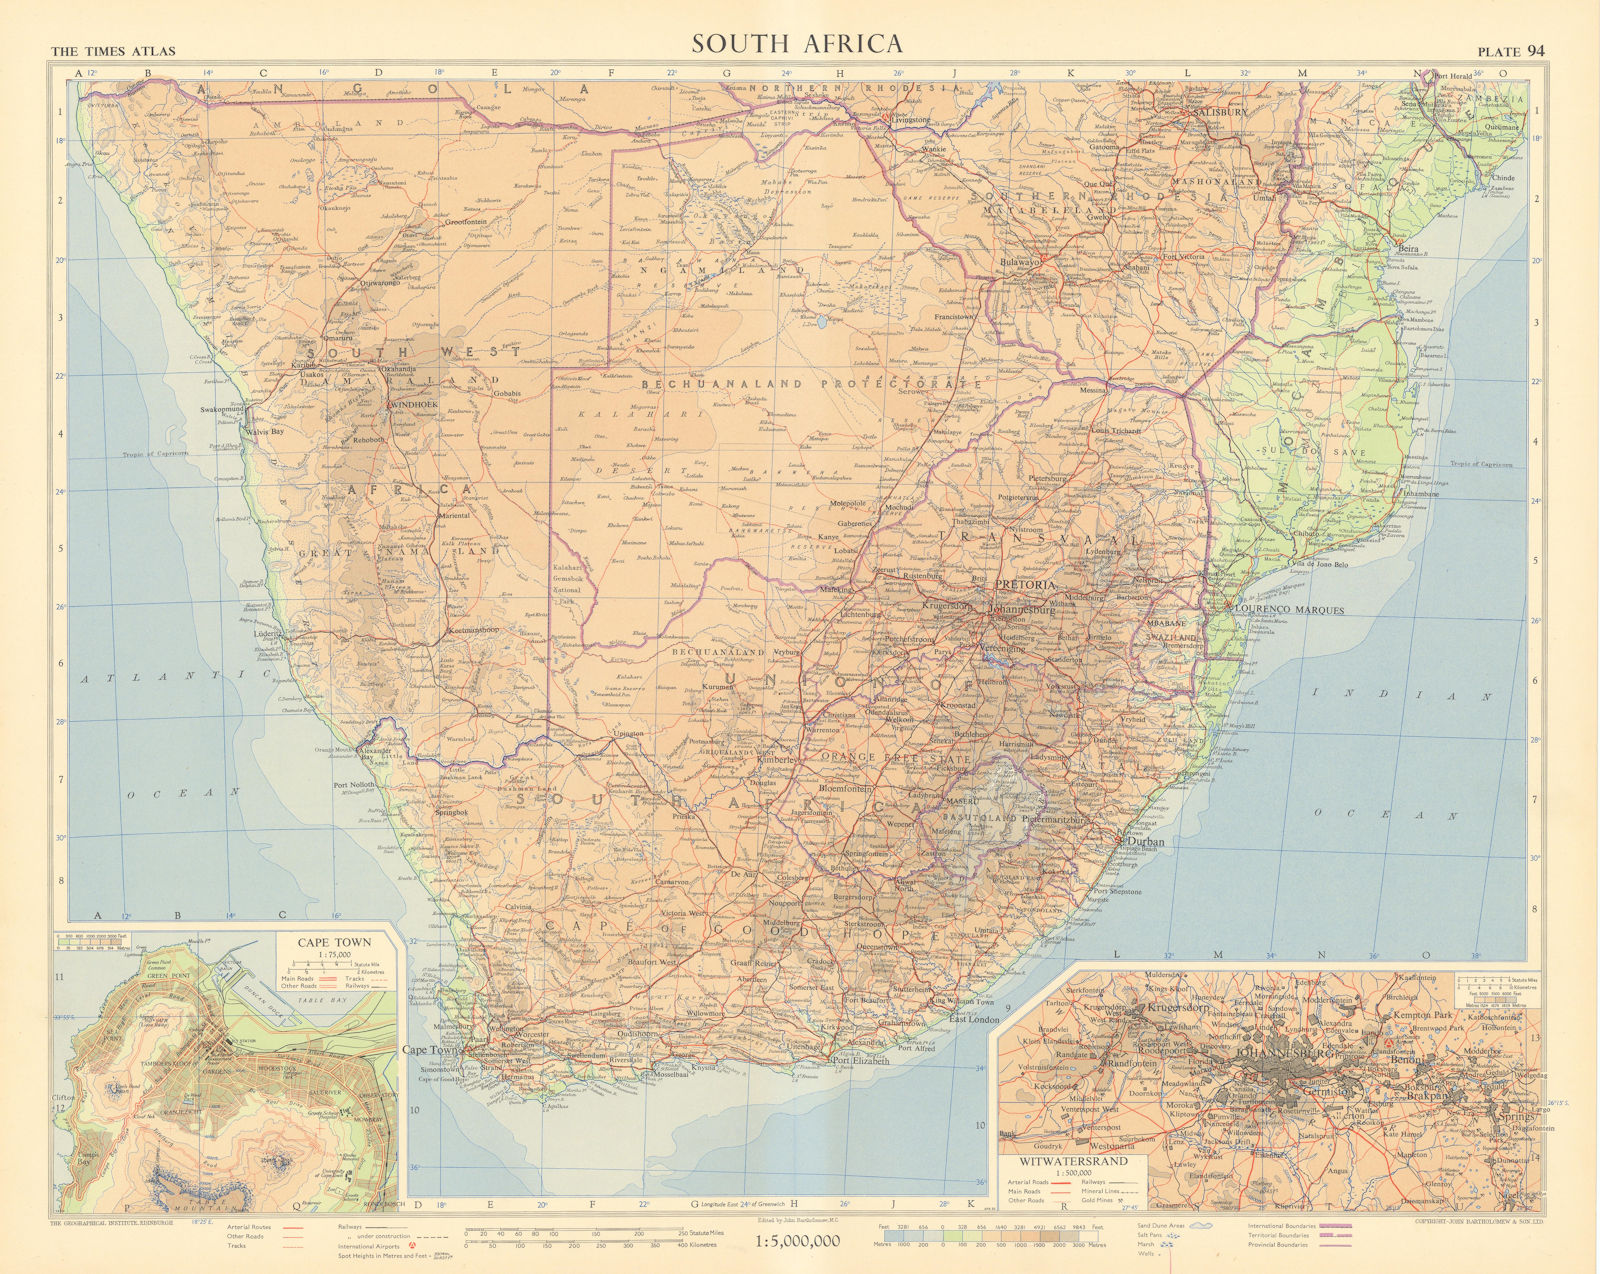 Associate Product Southern Africa. Cape Town environs. Witwatersrand Johannesburg. TIMES 1956 map